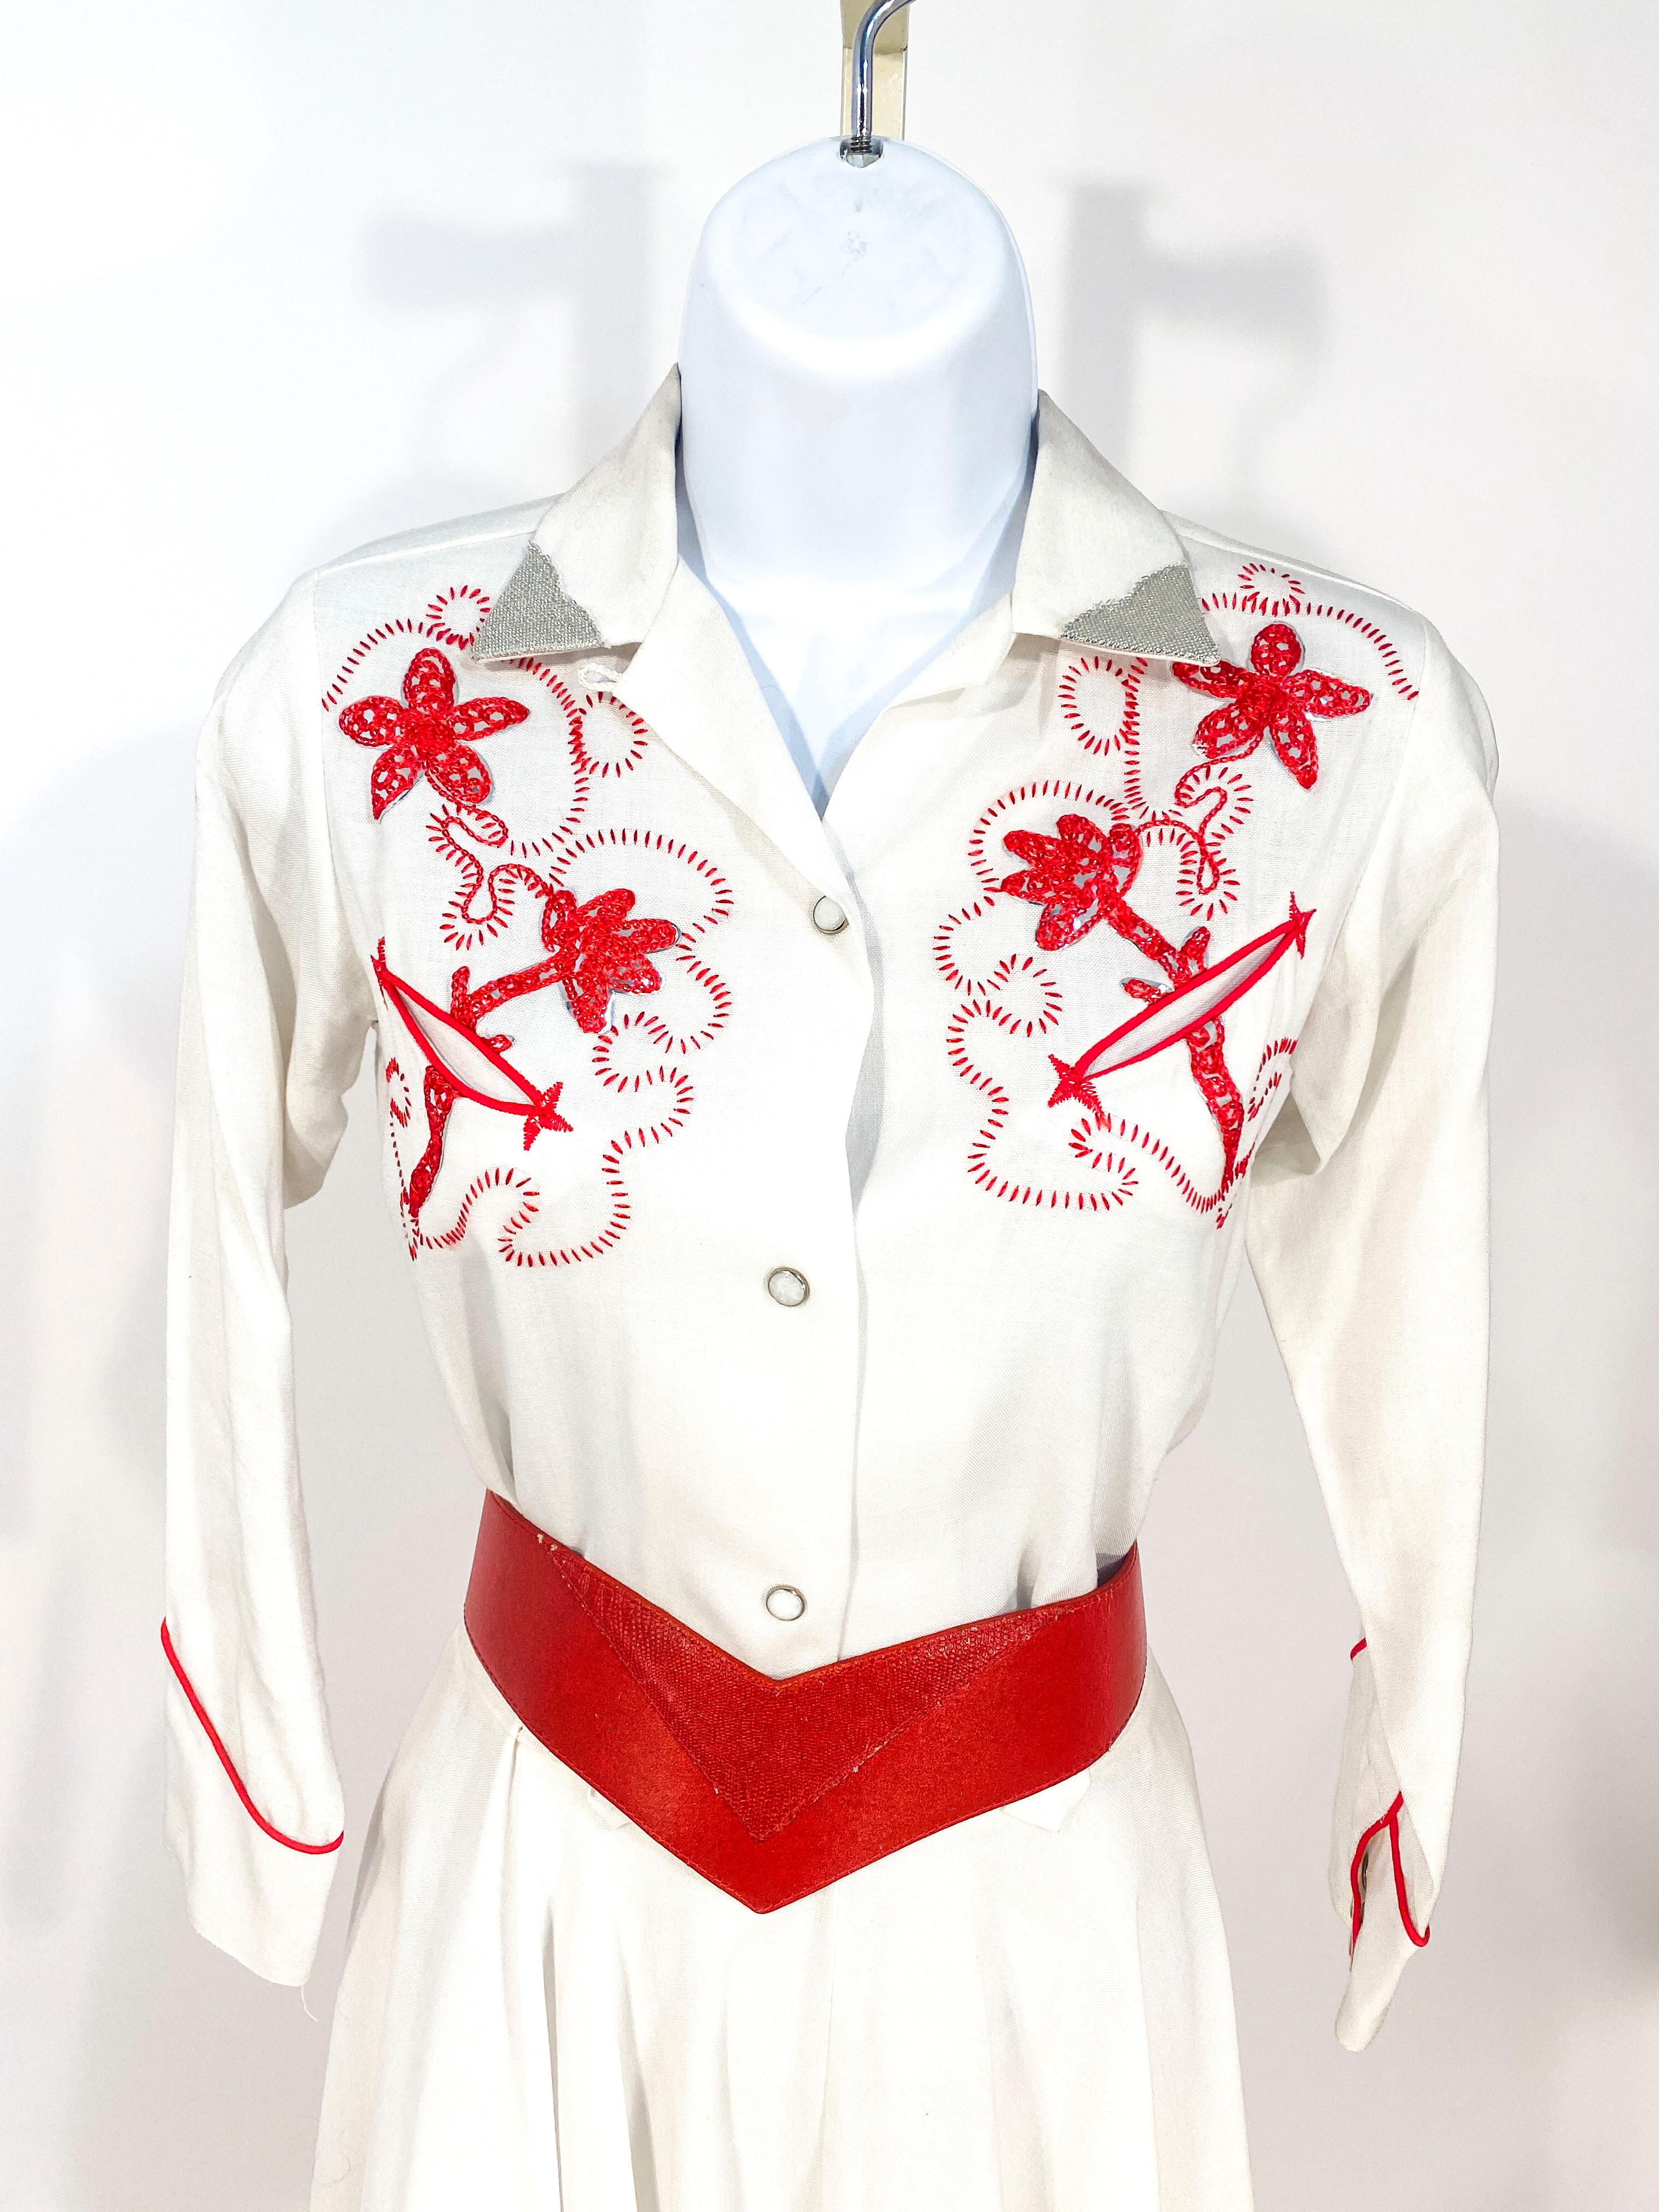 1950s petit J Bar T two-piece cowgirl set (shirt and matching skirt) in white with cactus flower embroidery in a coral red tone. The embroidery has touches of lurex foil. The front of the shirt and the cuffs have pearl-snap buttons and the skirt has